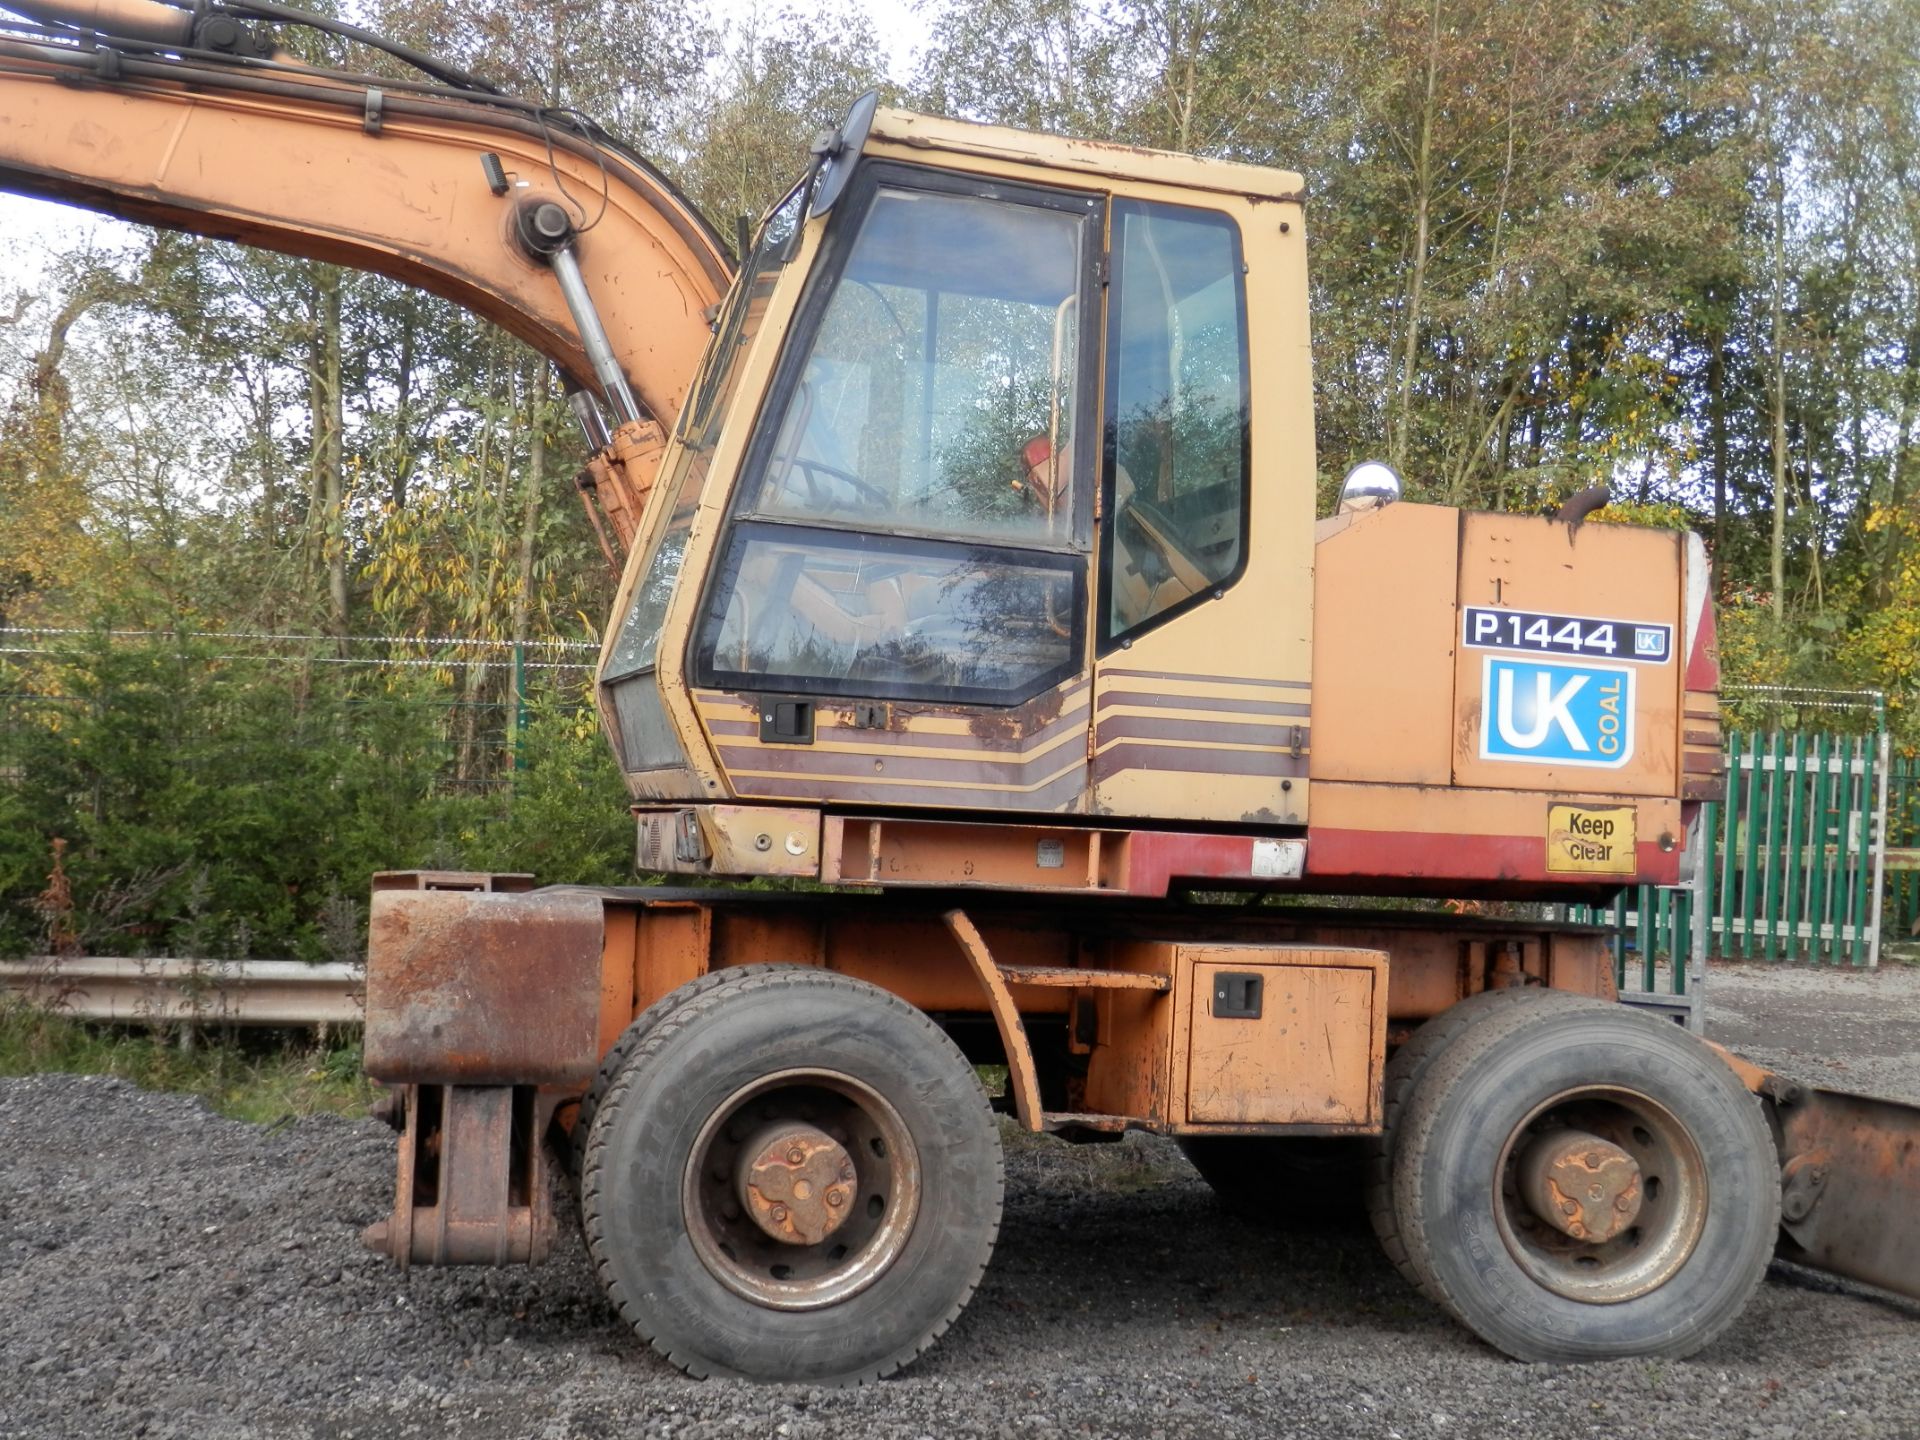 ALL WORKING CASE 688BP 17.2 TONNE DIGGER, 65KW DIESEL ENGINE & MAGNETIC LIFT ATTACHMENT INCLUDED. - Image 2 of 18